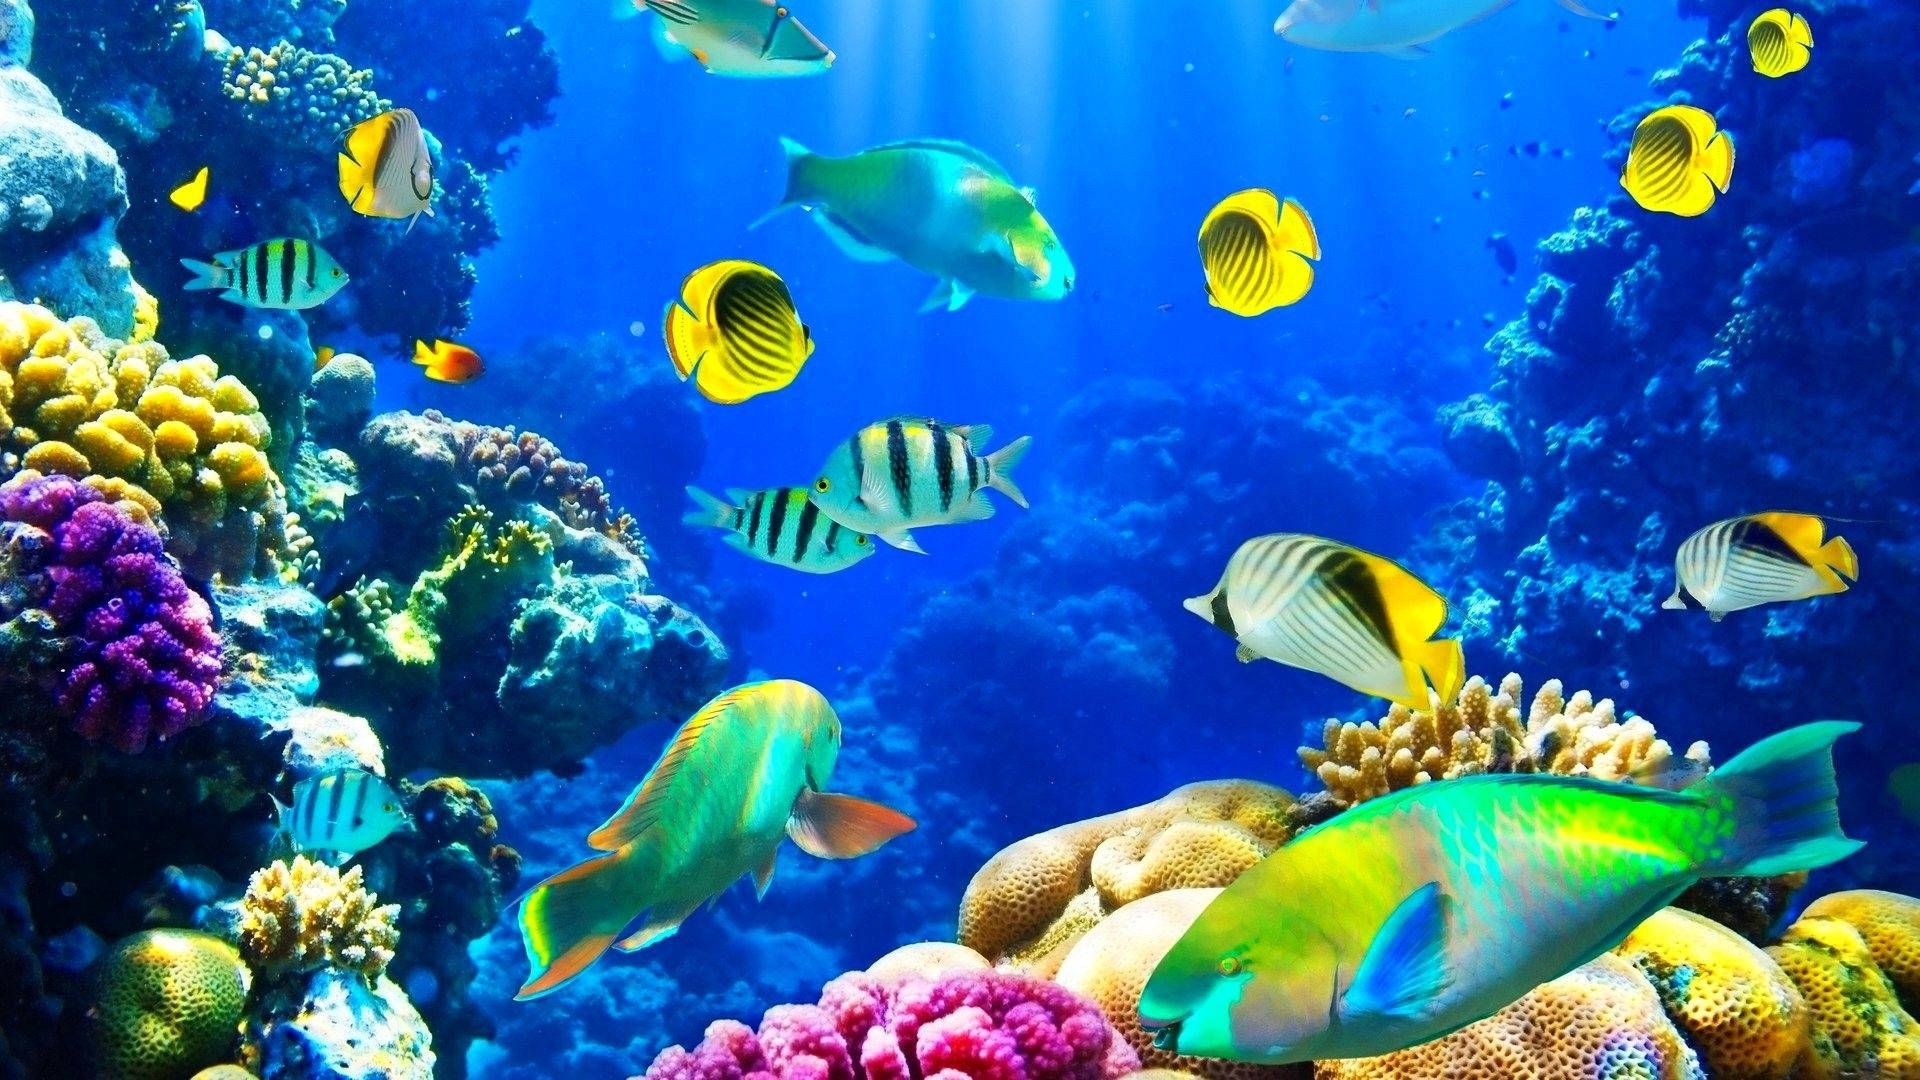 A tropical fish wallpaper - Underwater